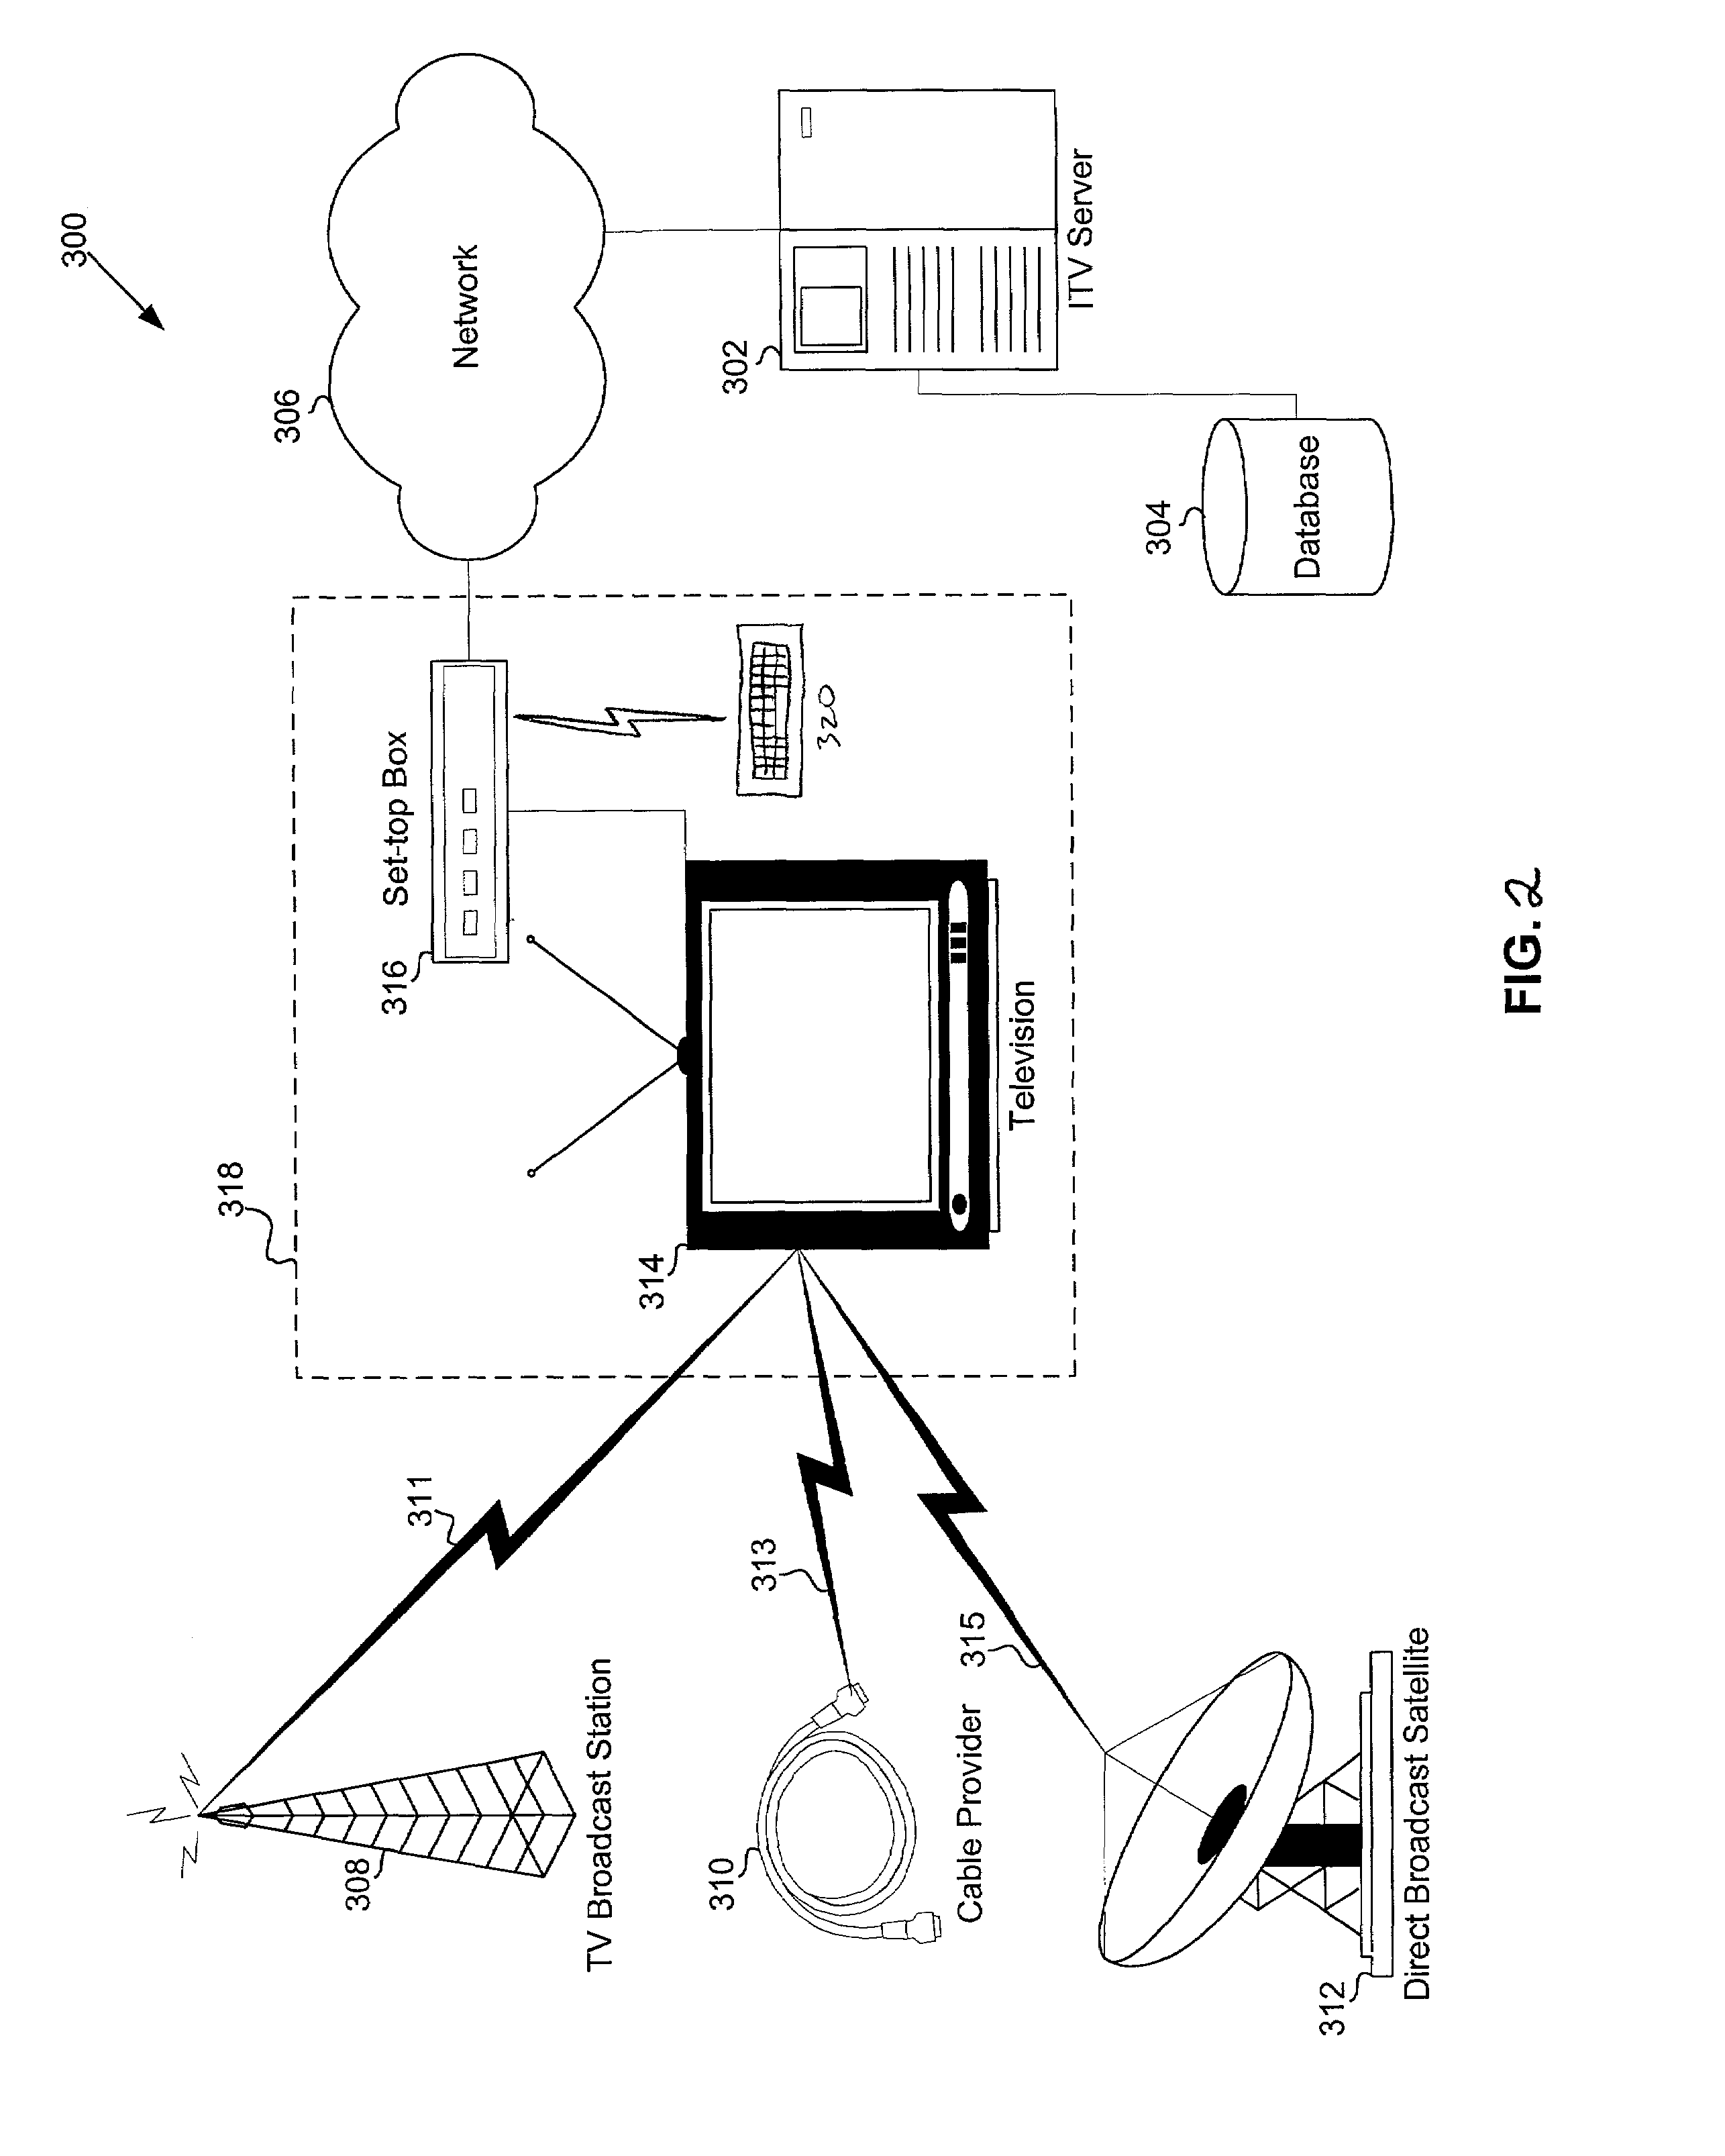 System and method for managing interactive programming and advertisements in interactive broadcast systems